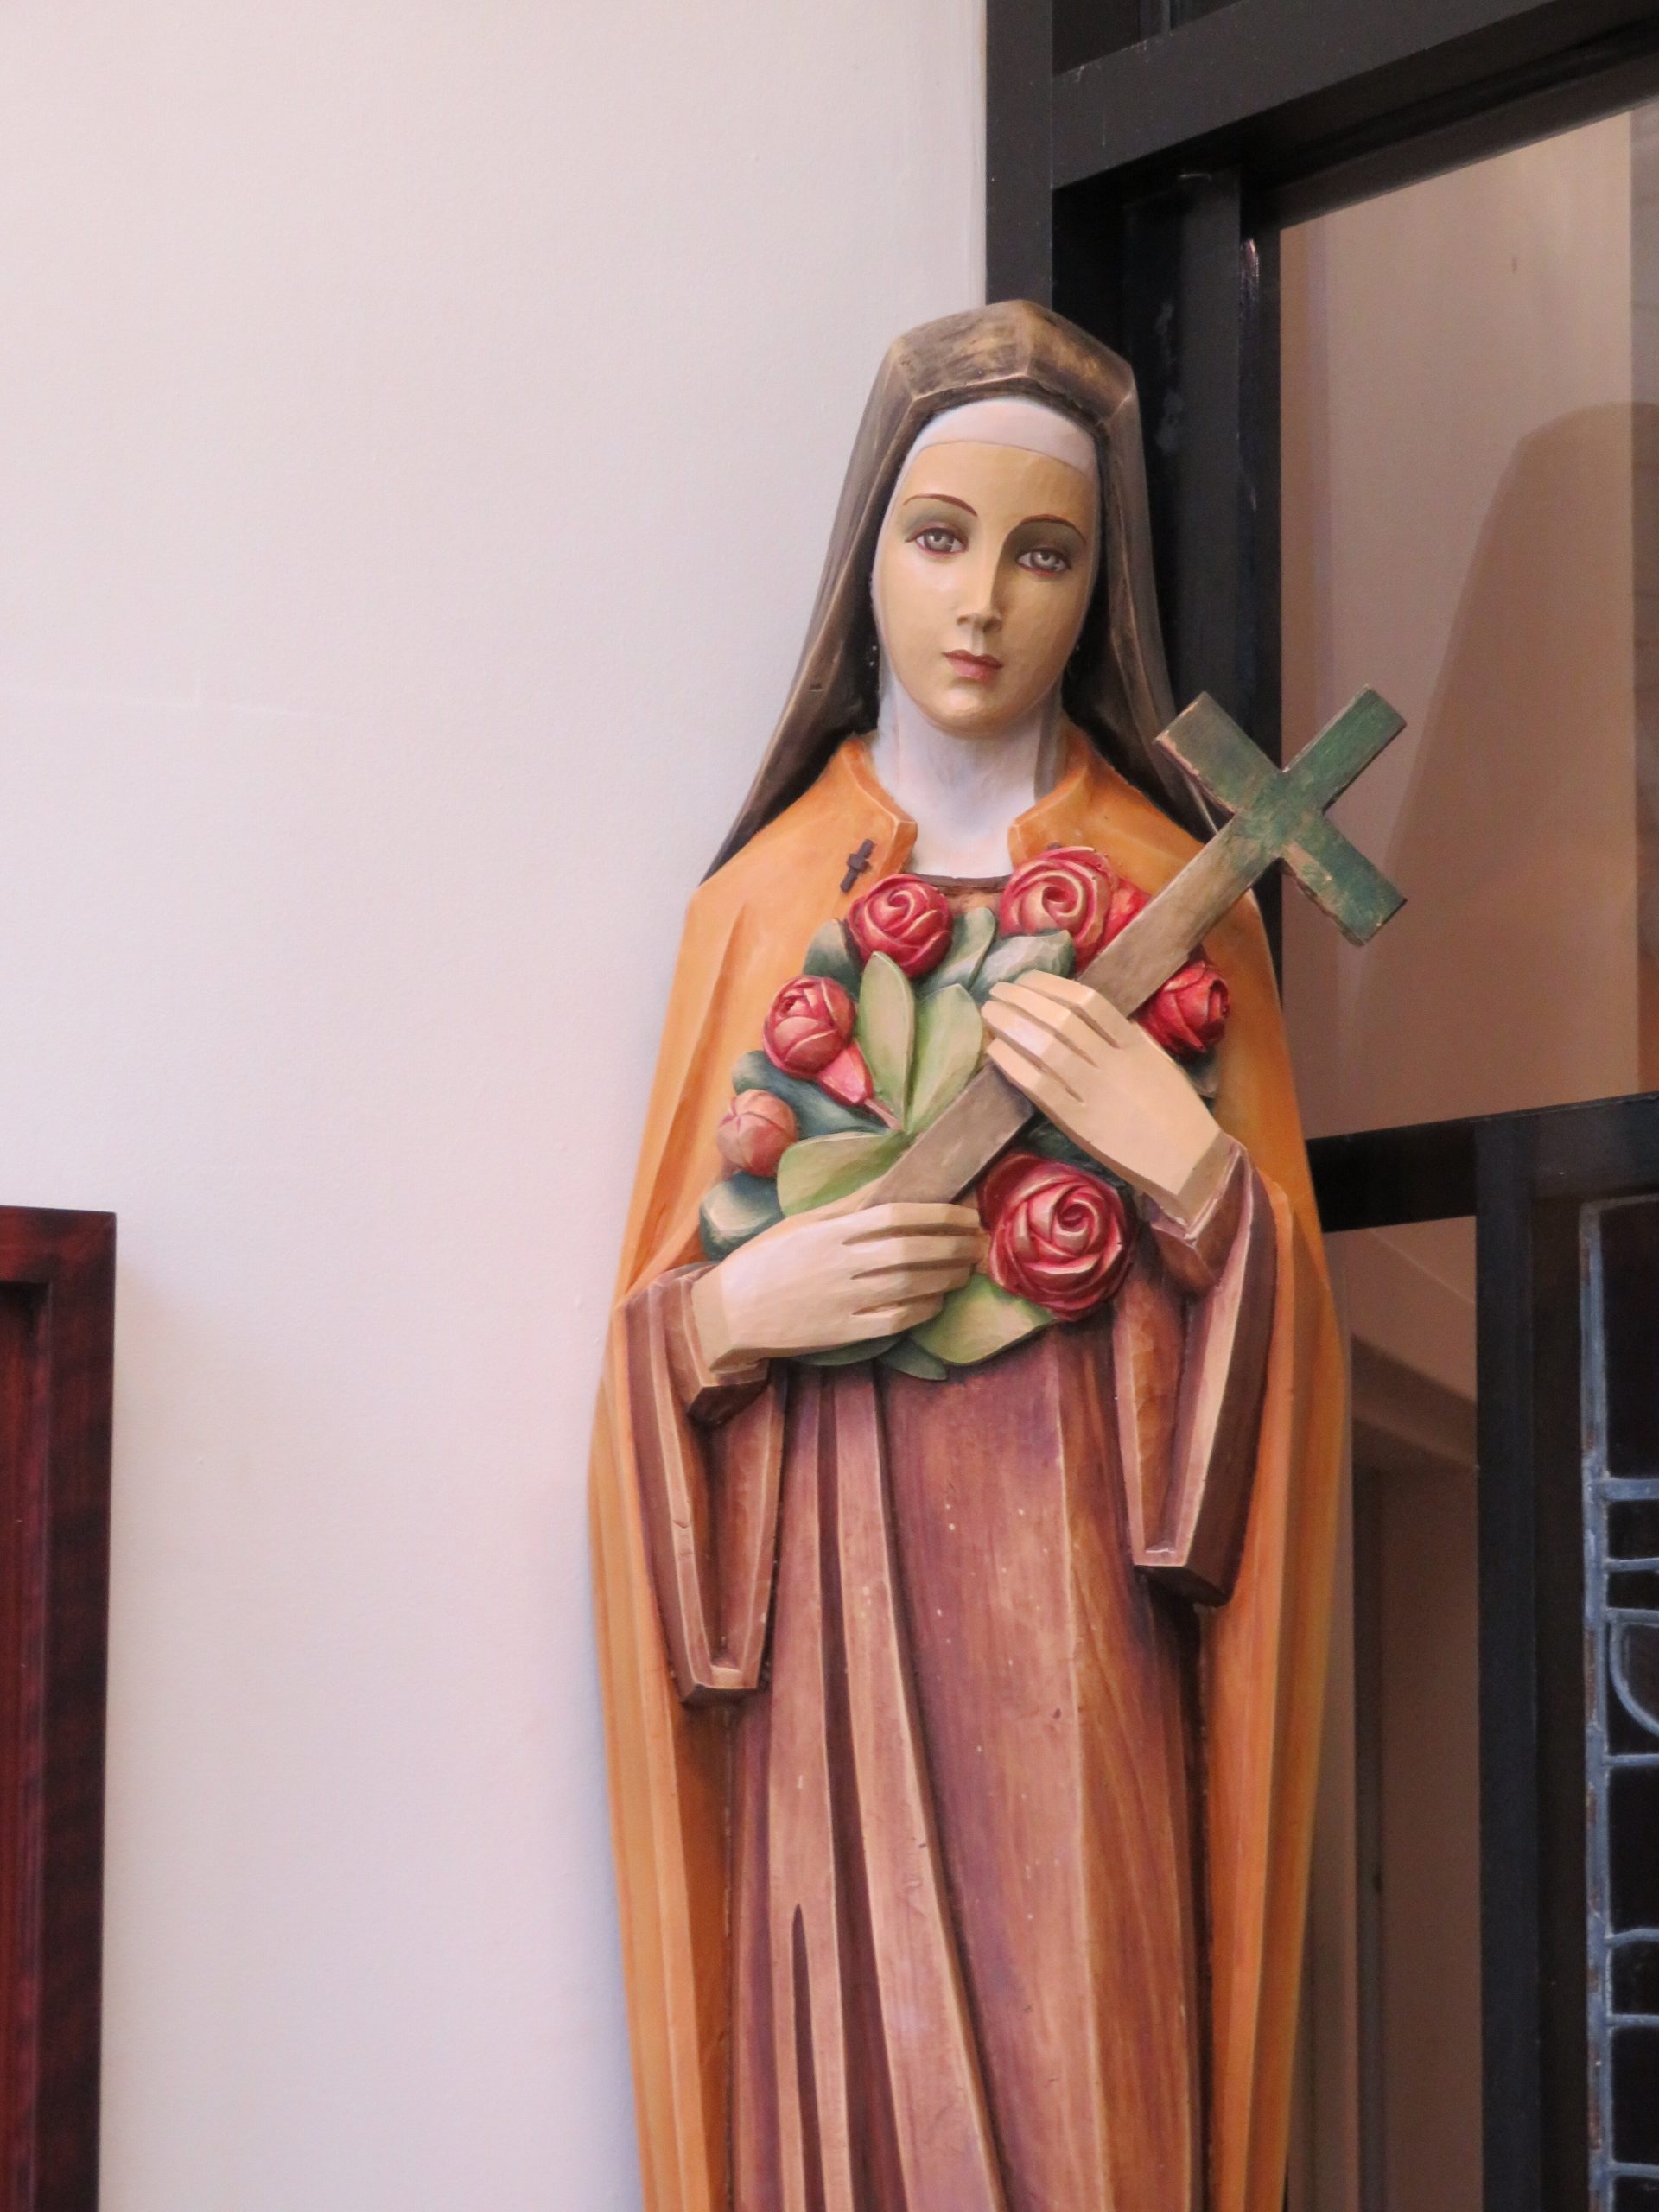 St Therese, The Little Flower. Why Does She Have This Title?